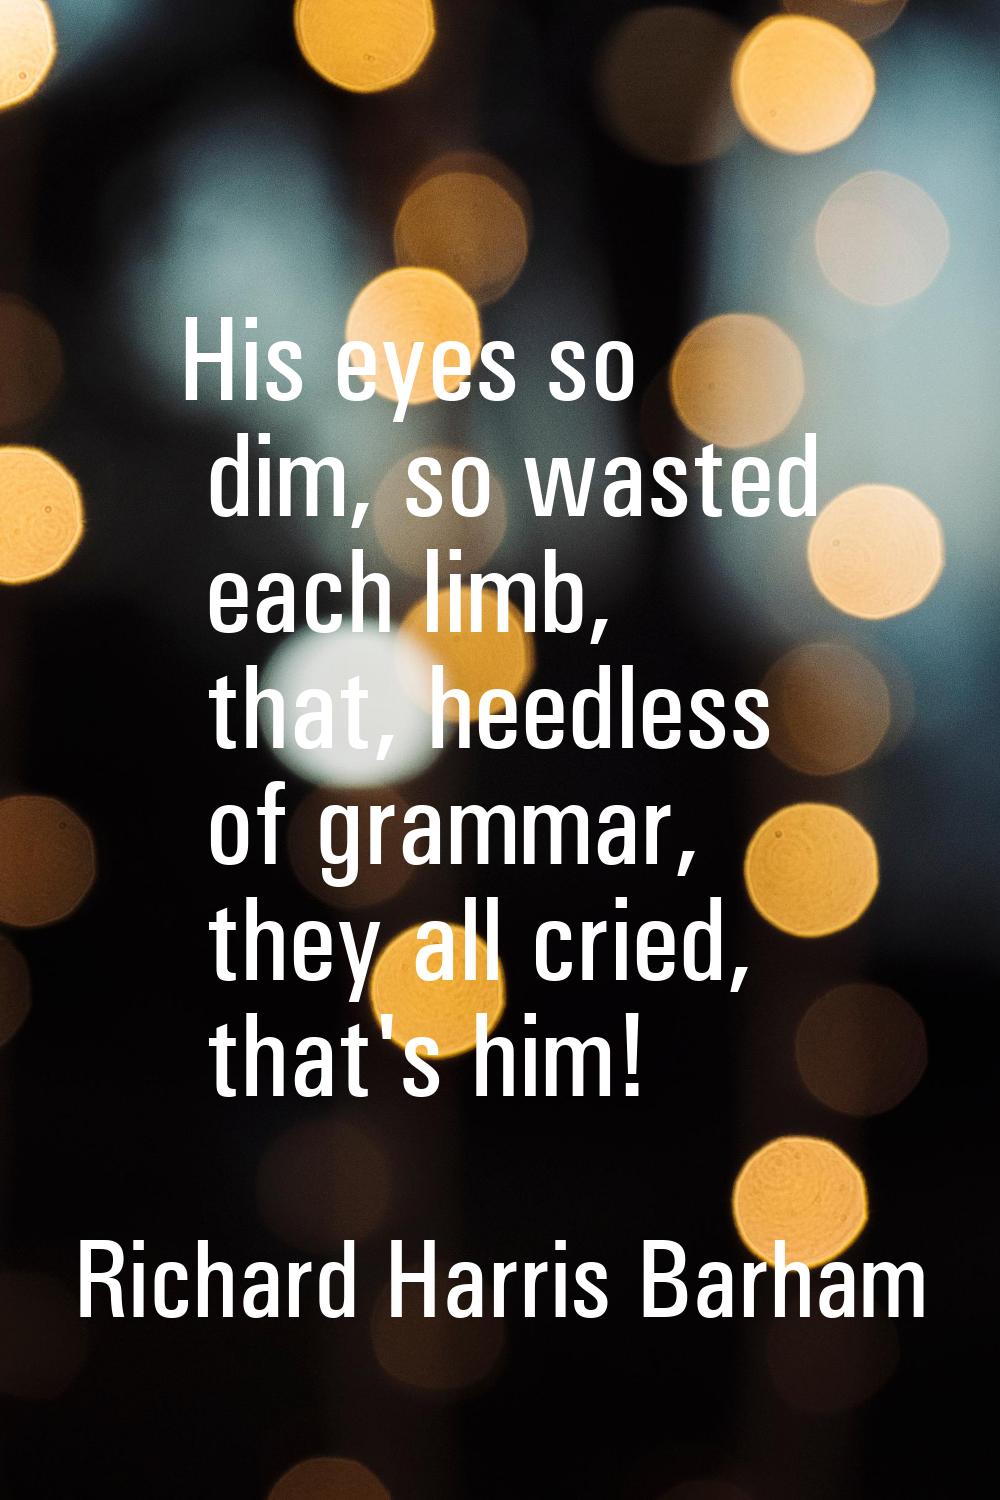 His eyes so dim, so wasted each limb, that, heedless of grammar, they all cried, that's him!